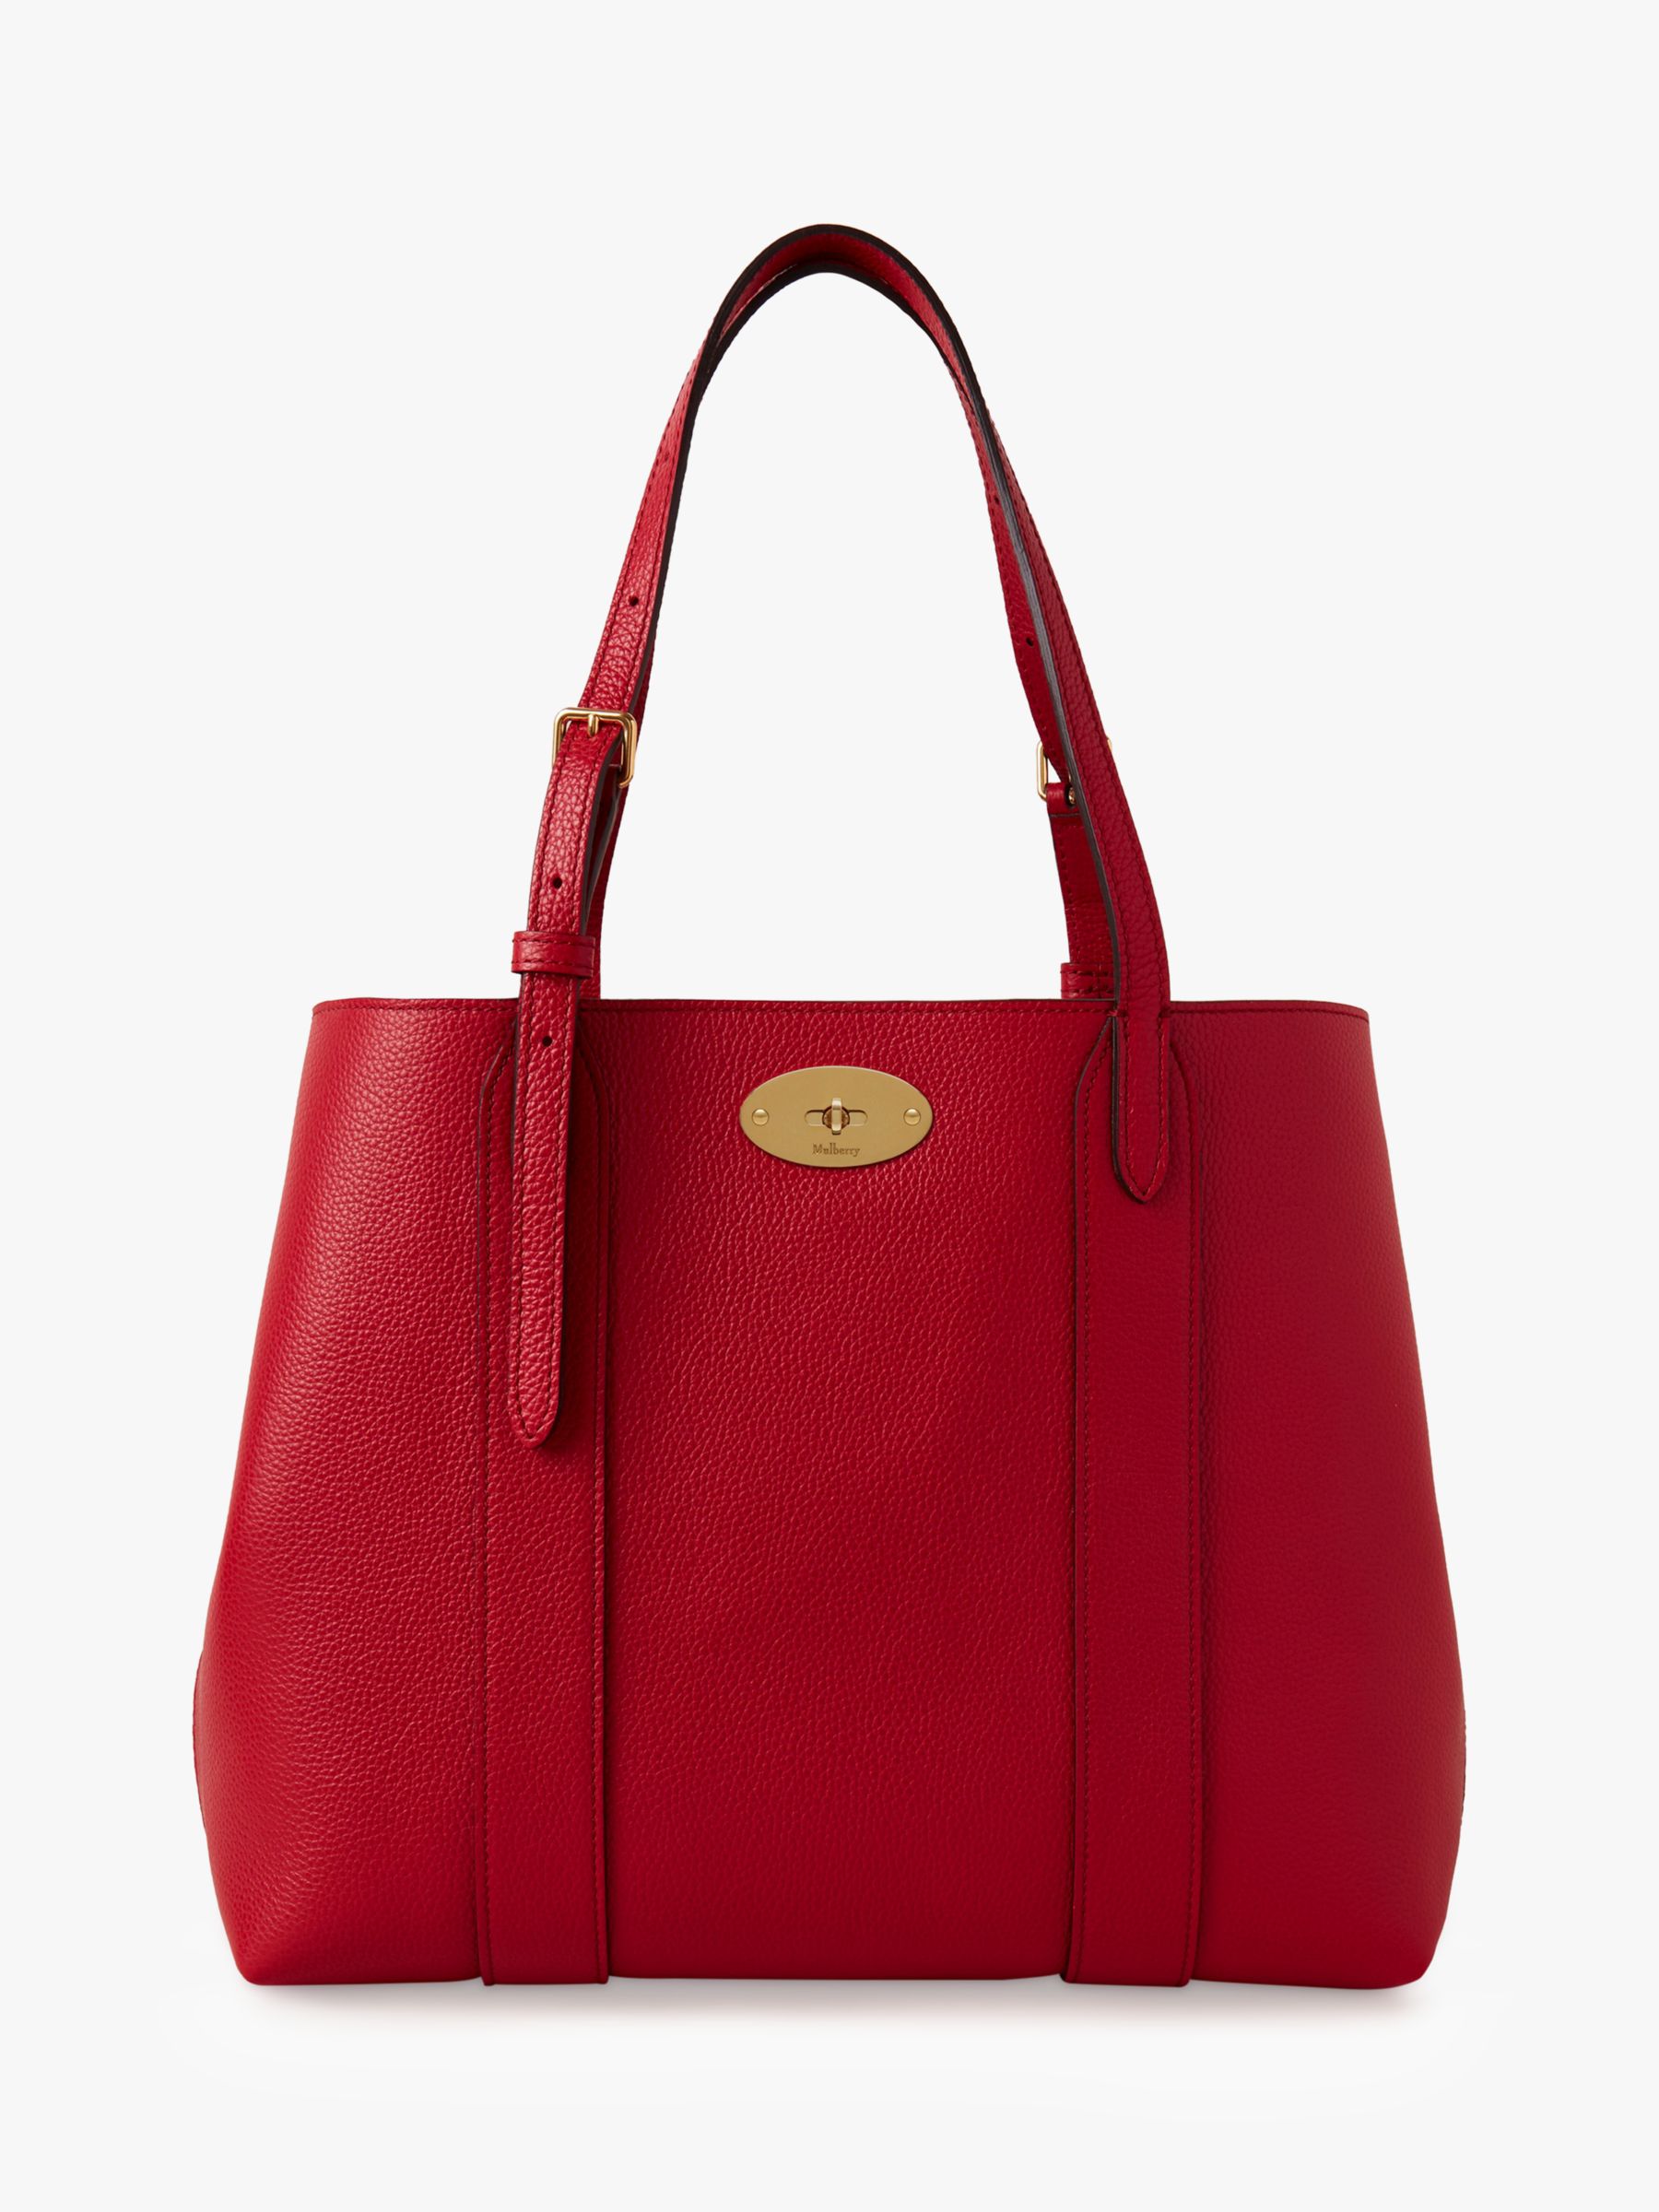 Mulberry Small Bayswater Classic Grain Leather Tote Bag, Scarlet at John Lewis & Partners